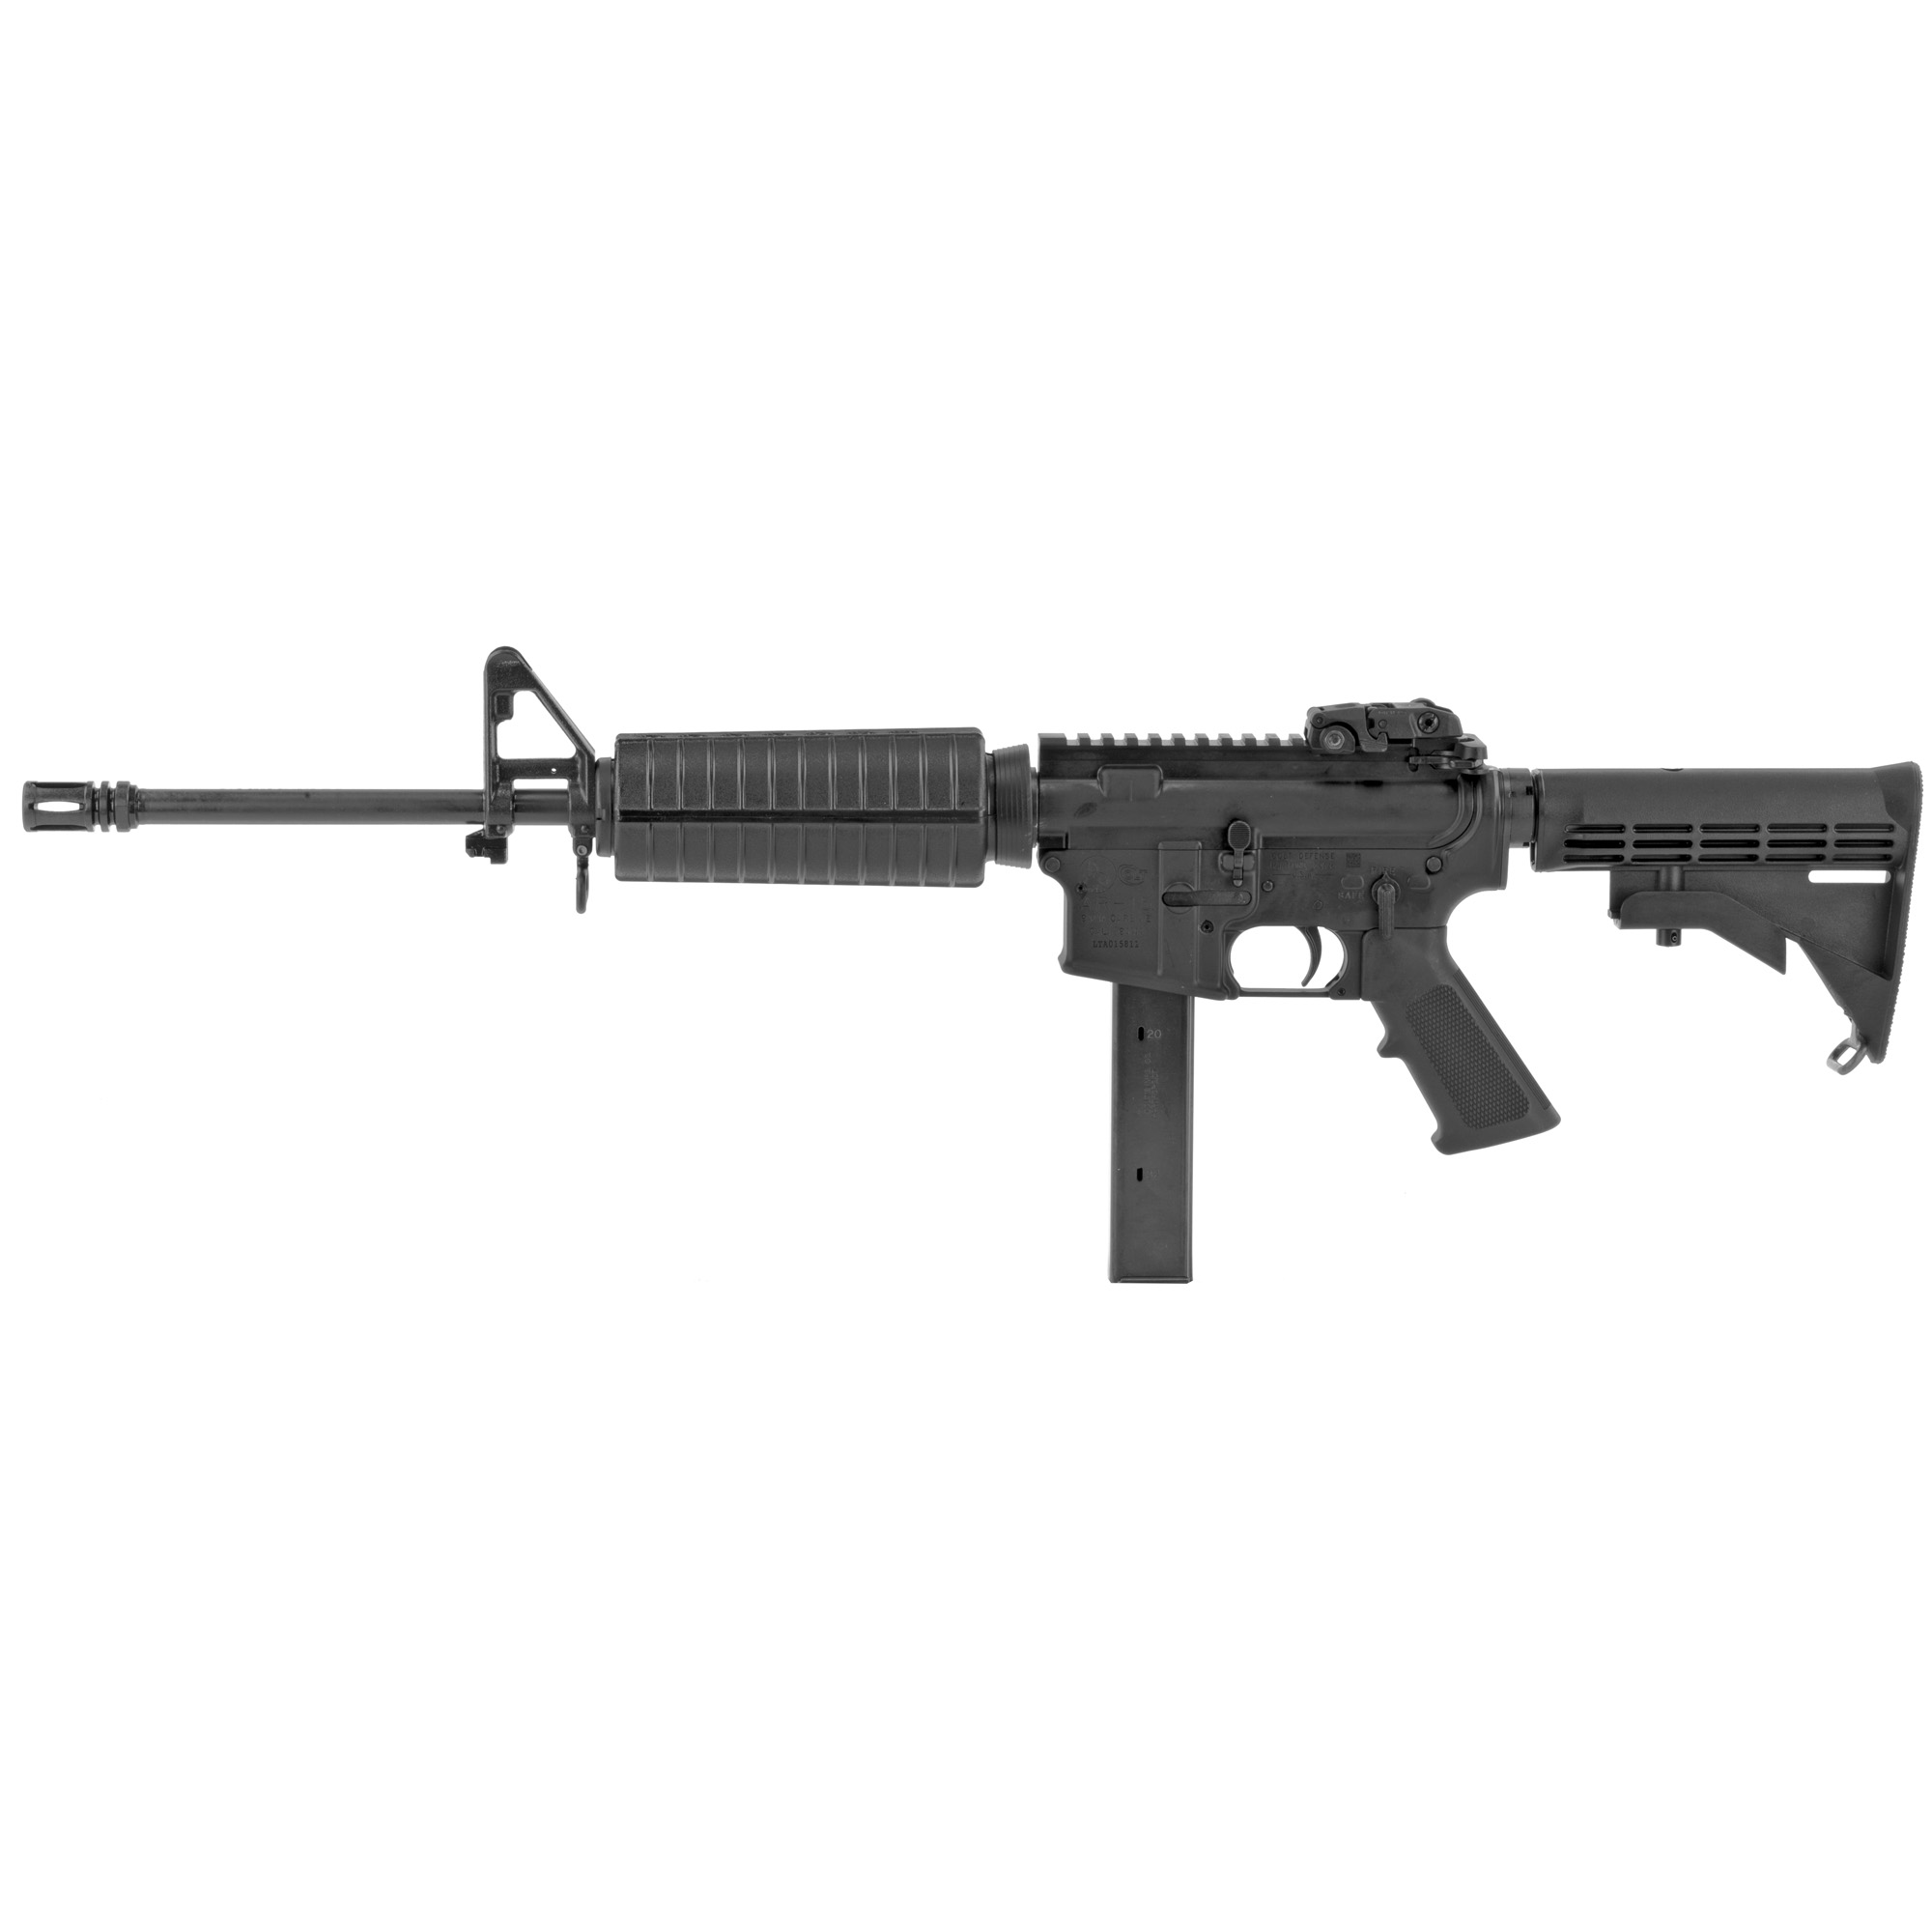 Colt 6951 Semi Auto Rifle 9mm Luger 16" Lightweight Barrel 32 Rds. Polymer Handguards M4 Collapsible Stock Black (AR6951)